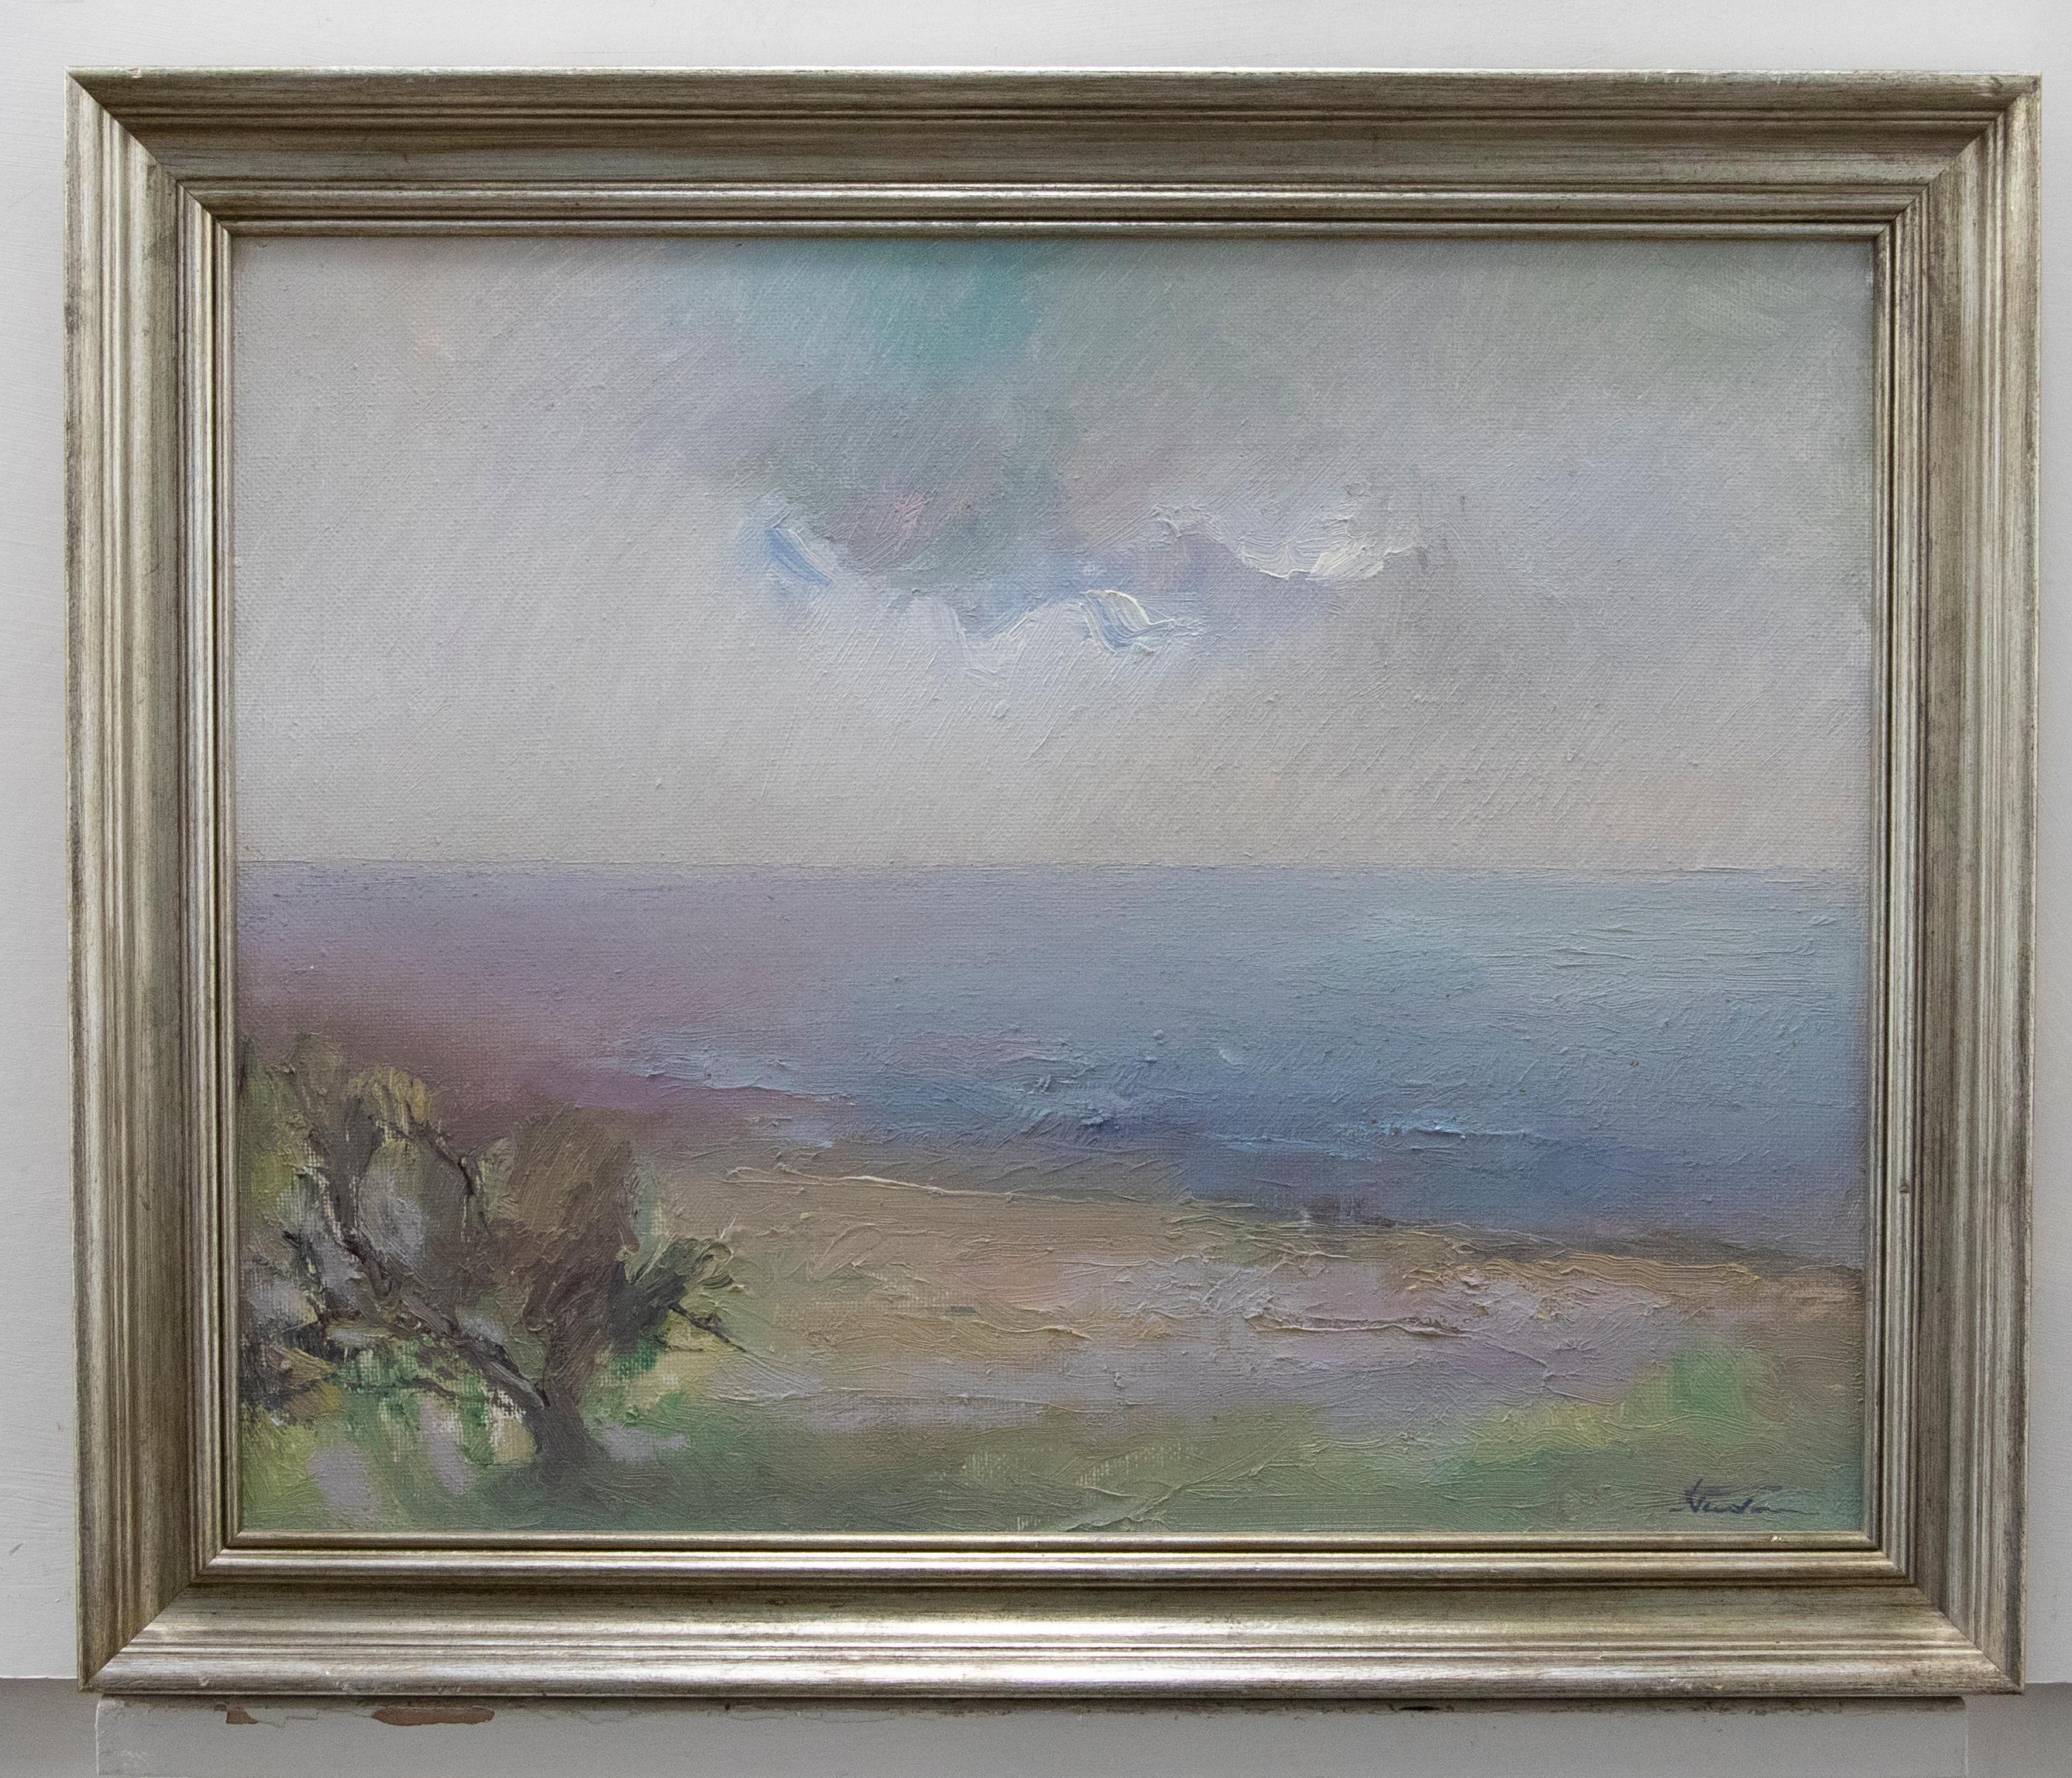 Unknown Figurative Painting - Framed Contemporary Oil - Rain Cloud